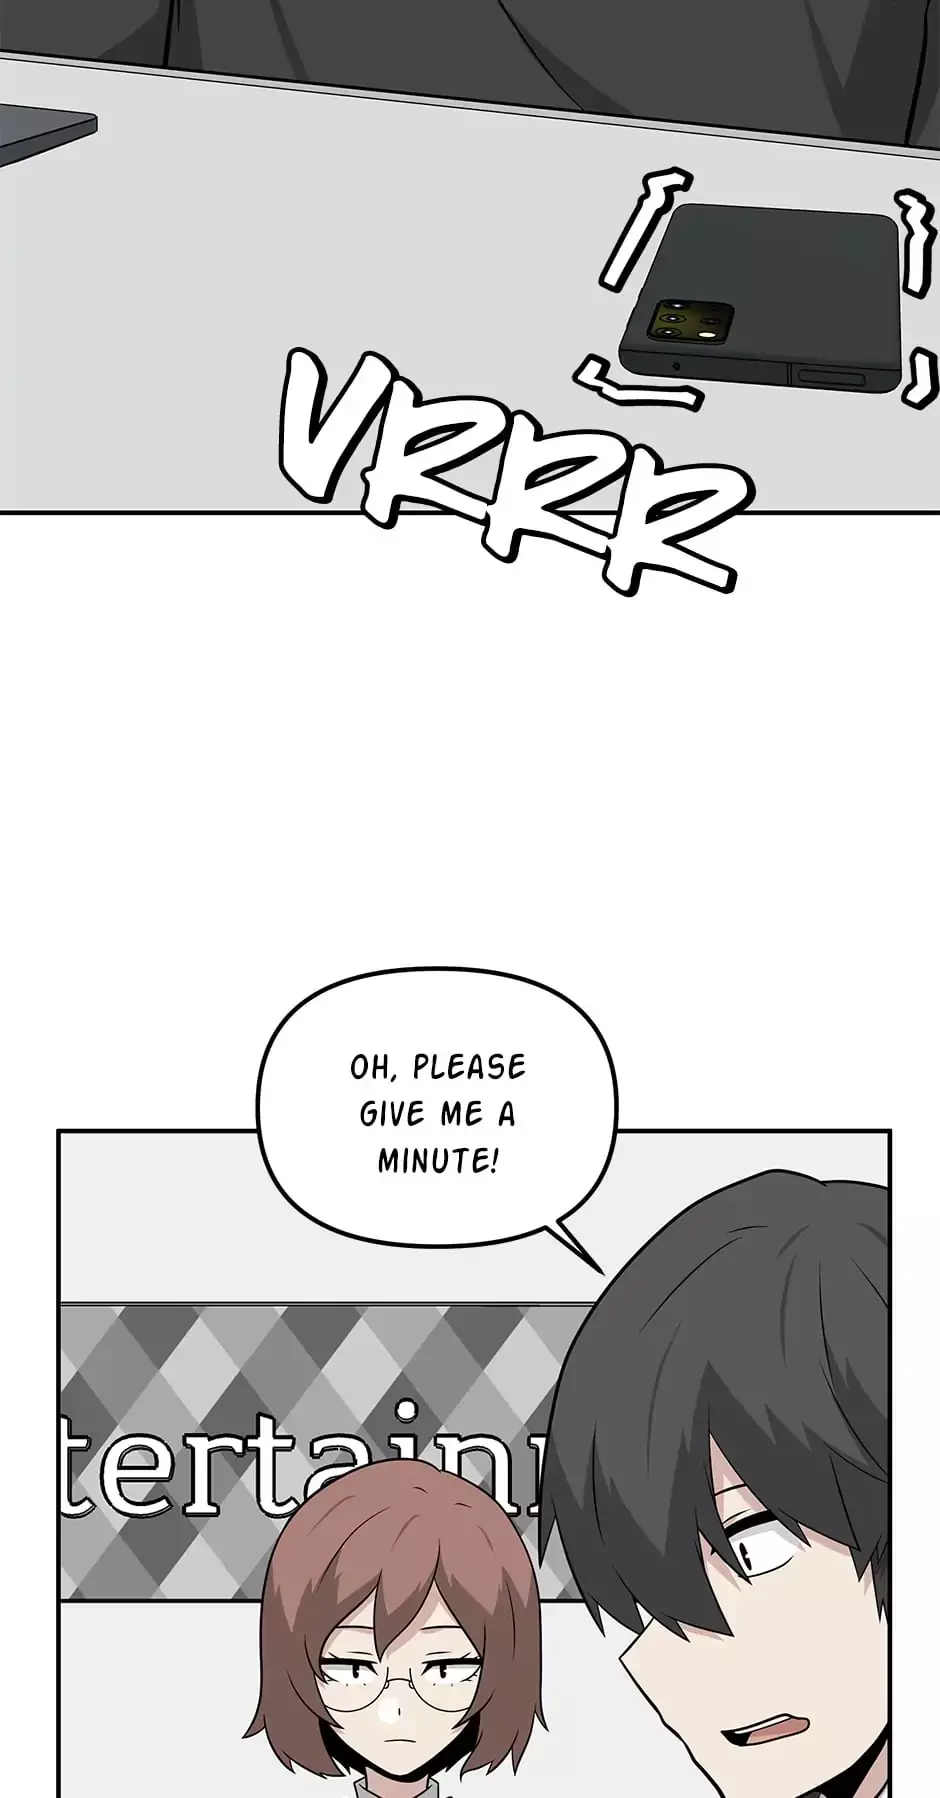 Where Are You Looking, Manager? - 73 page 50-674e2d96